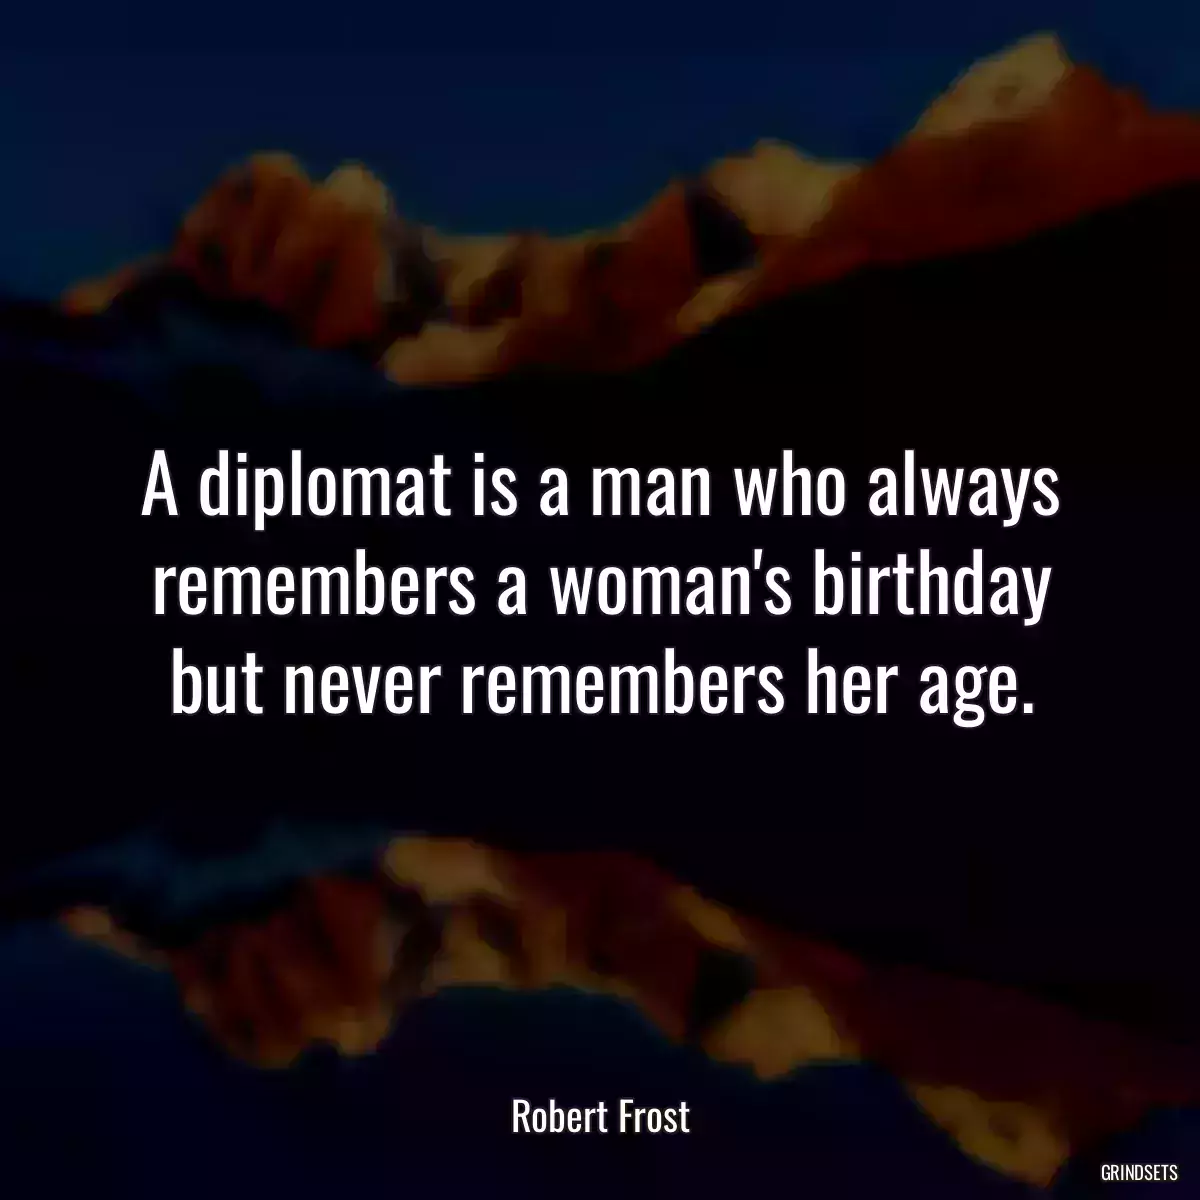 A diplomat is a man who always remembers a woman\'s birthday but never remembers her age.